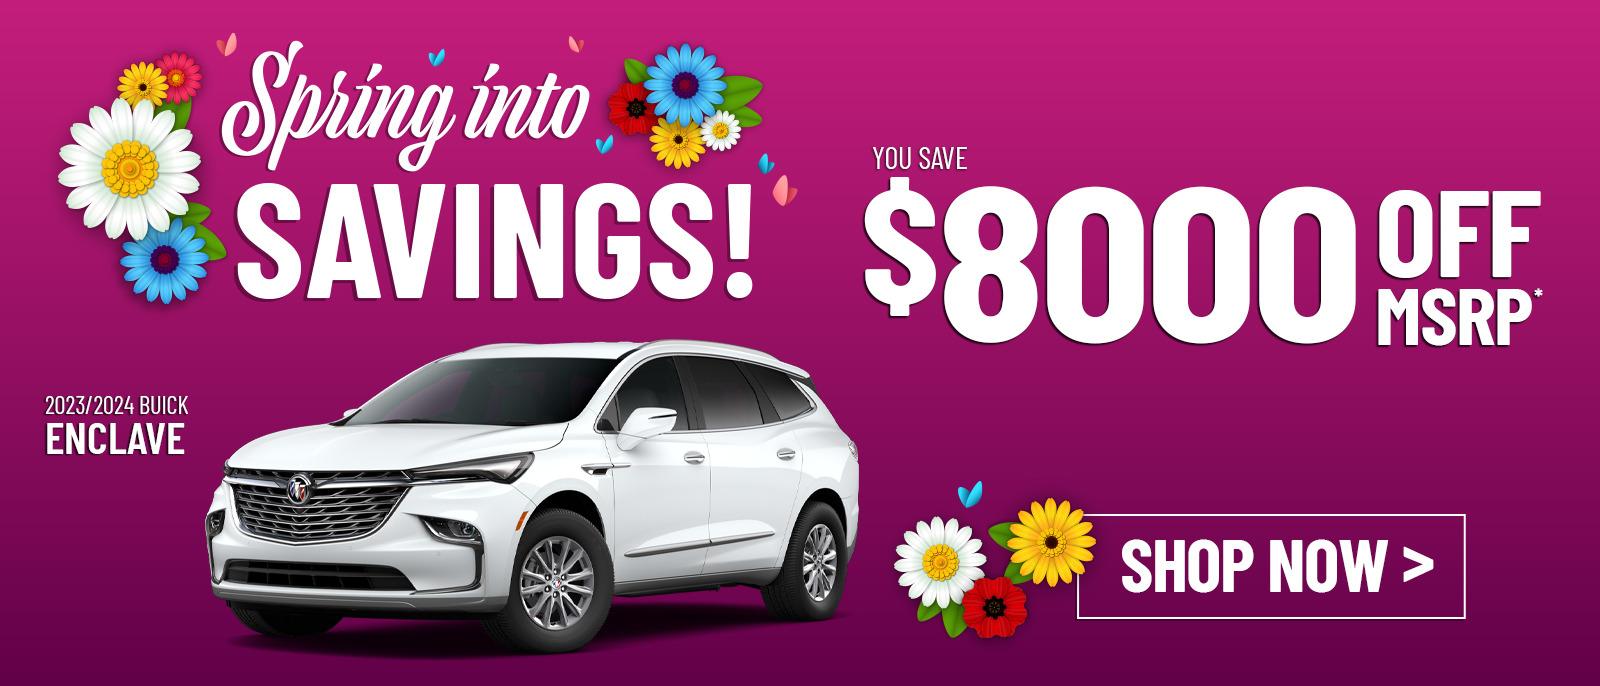 2023/2024 Buick Enclave - You Save $8000 Off MSRP